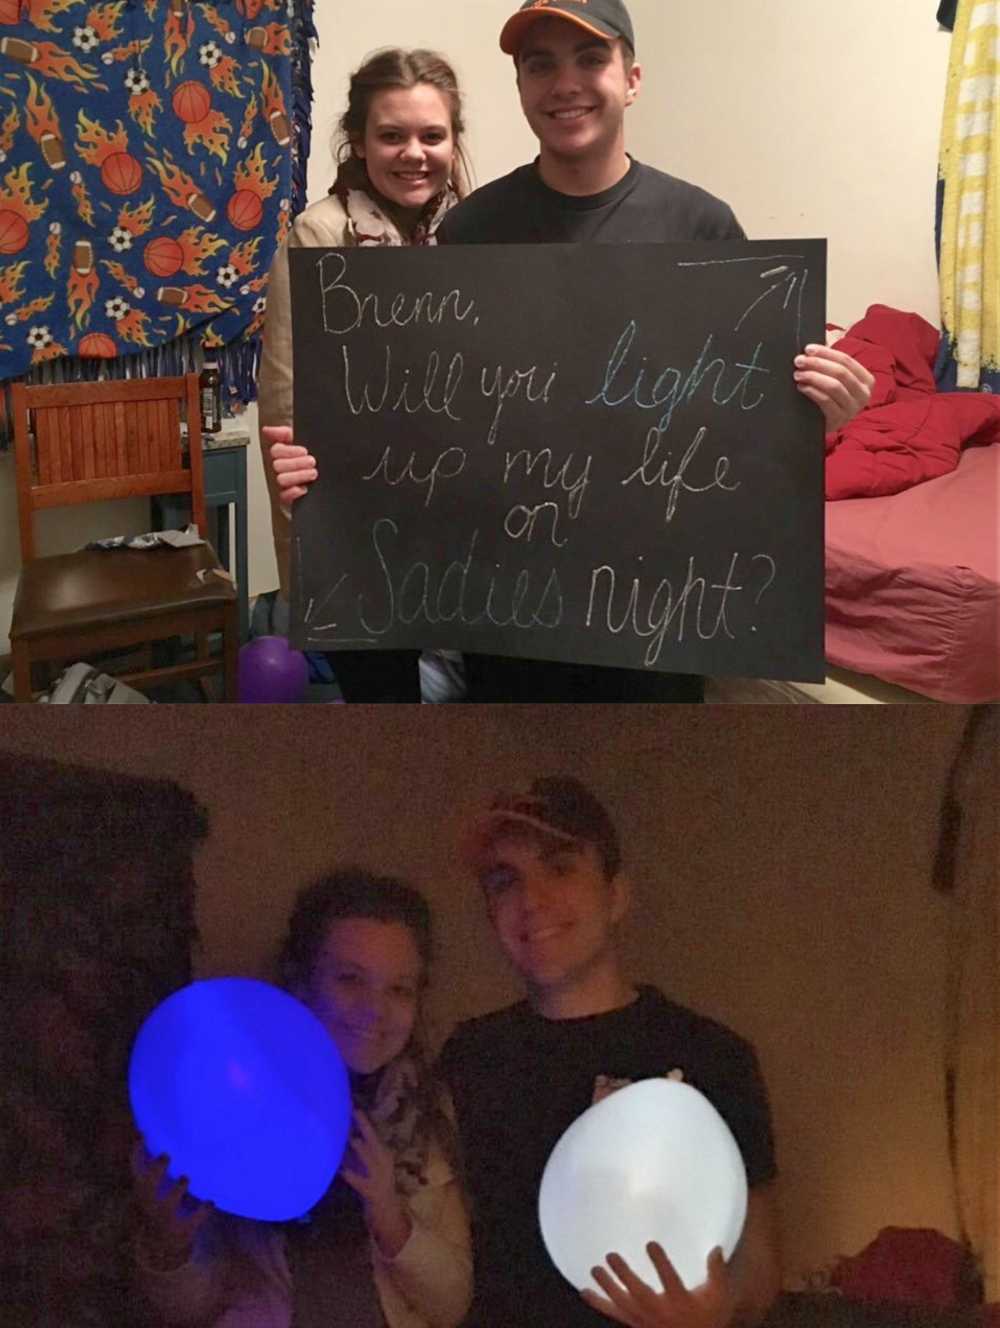 Claire Zuwala, senior, asked senior Brennen Colley to the dance with a poster and glow-in-the-dark balloons.  